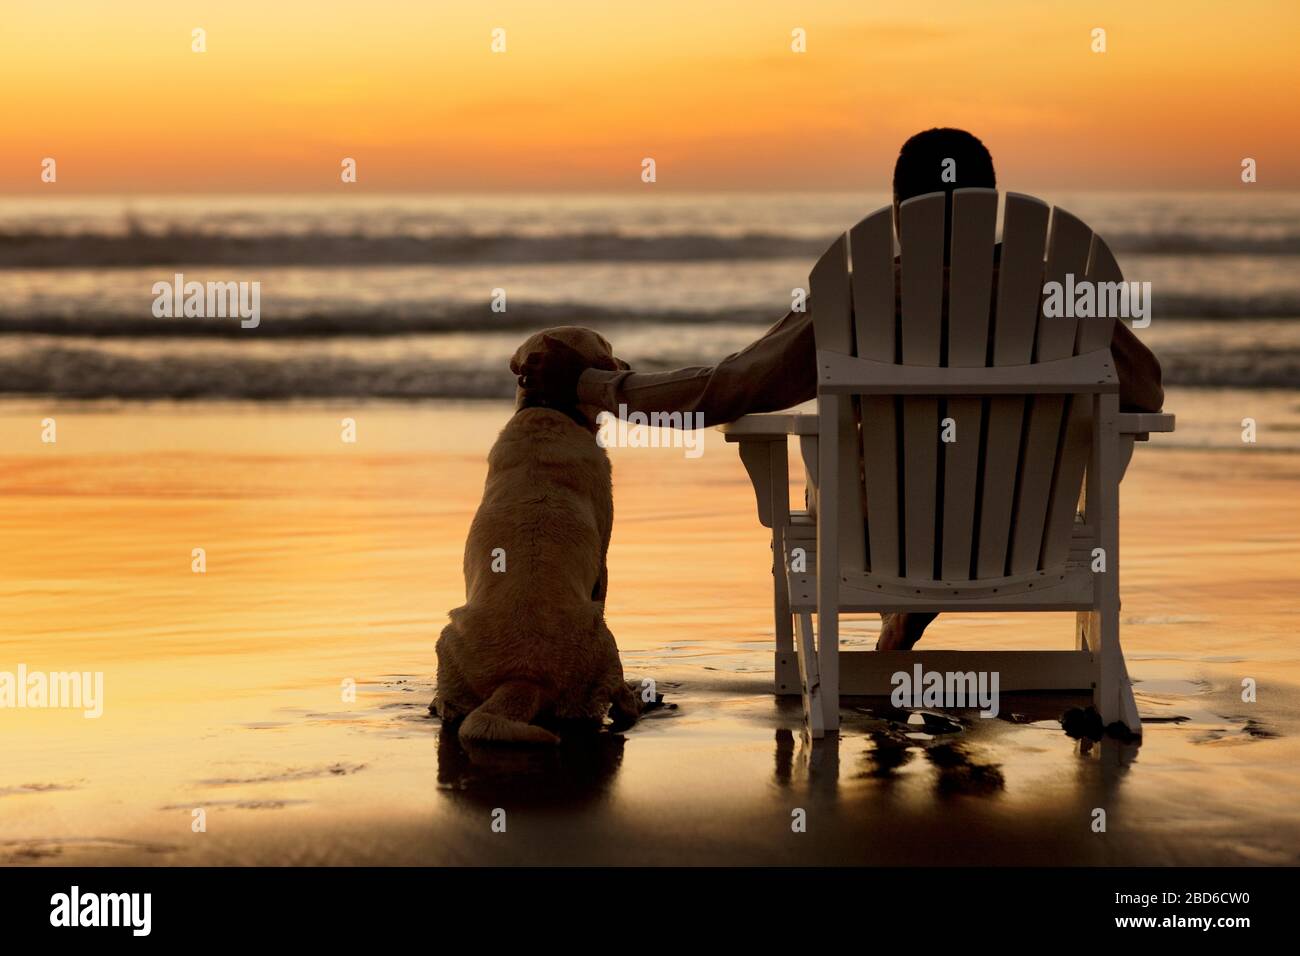 Relaxing senior man watching the sunset on a beach with his dog. Stock Photo